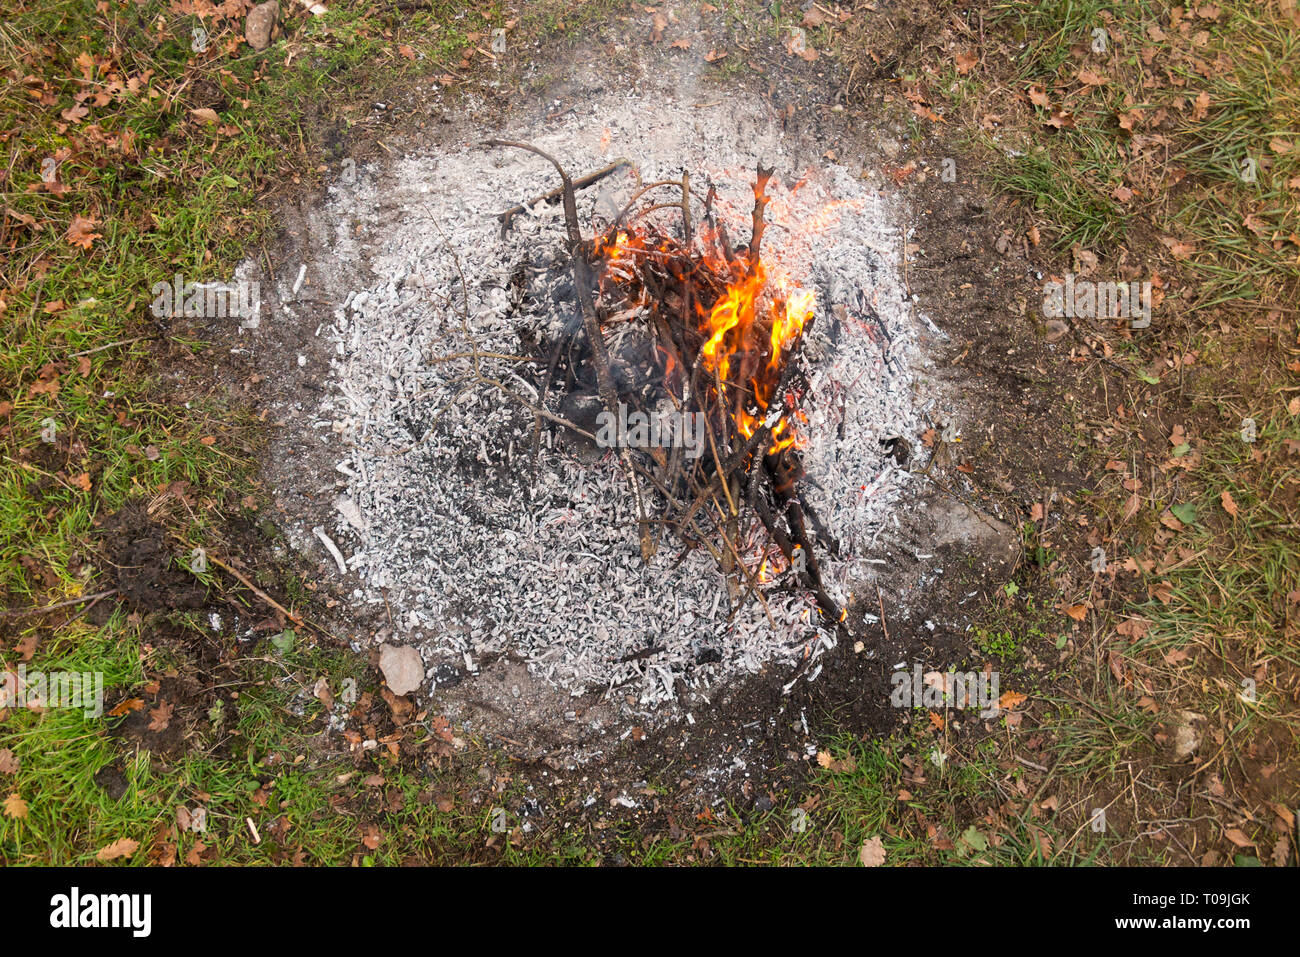 The dying embers and grey ash of a domestic bonfire which had been lit to burn leaves, twigs, garden waste, in a garden in the countryside. (104) Stock Photo